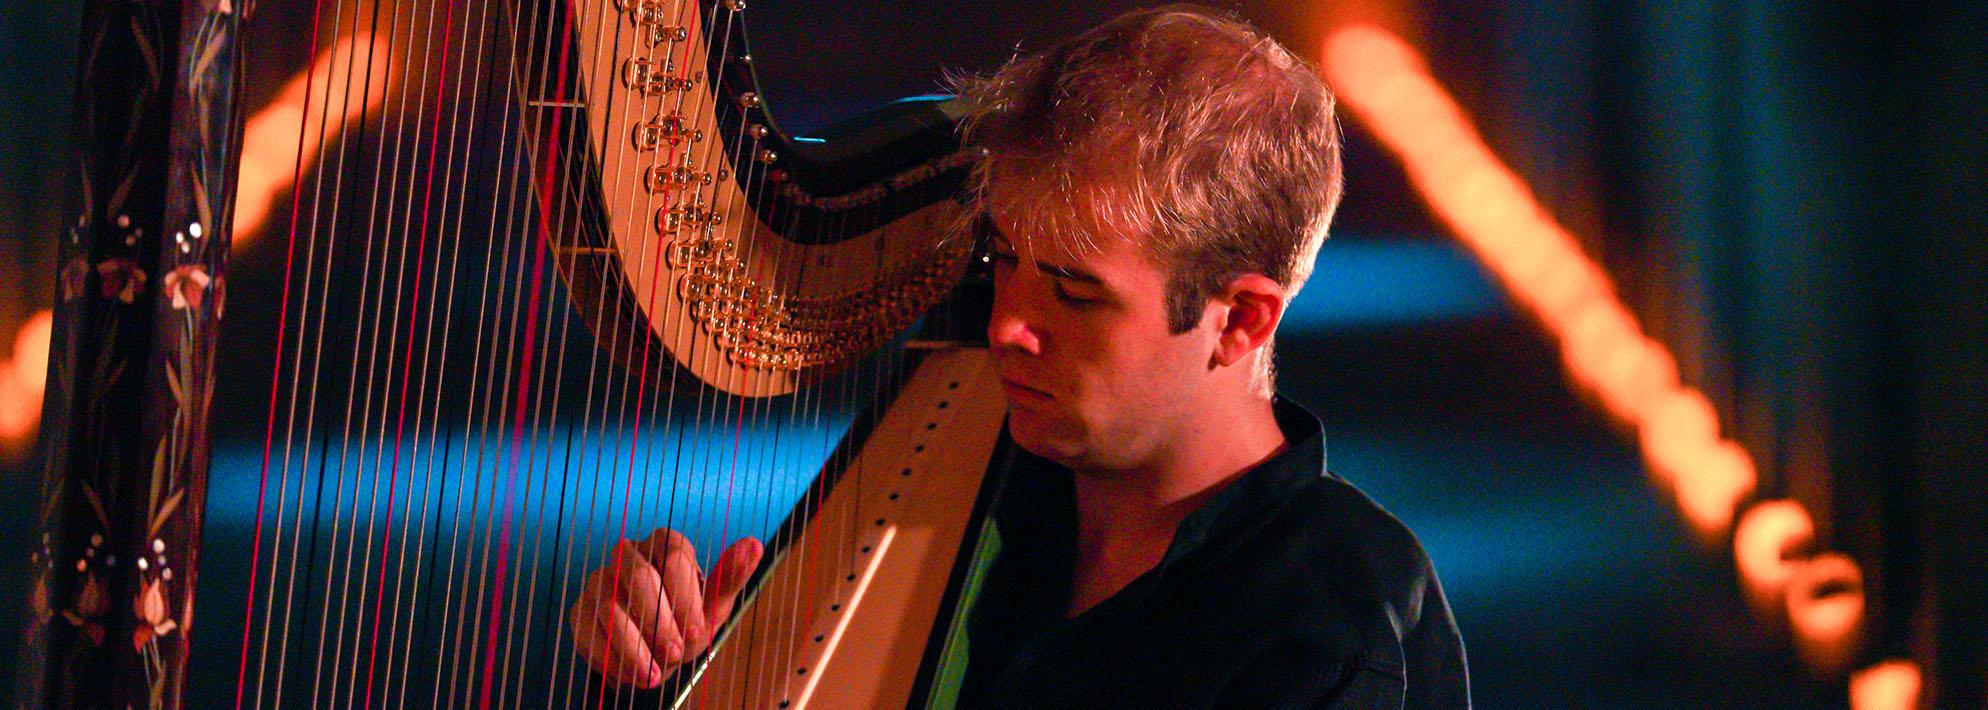 Parker Ramsay wearing a black shirt playing the harp on stage with blue lighting